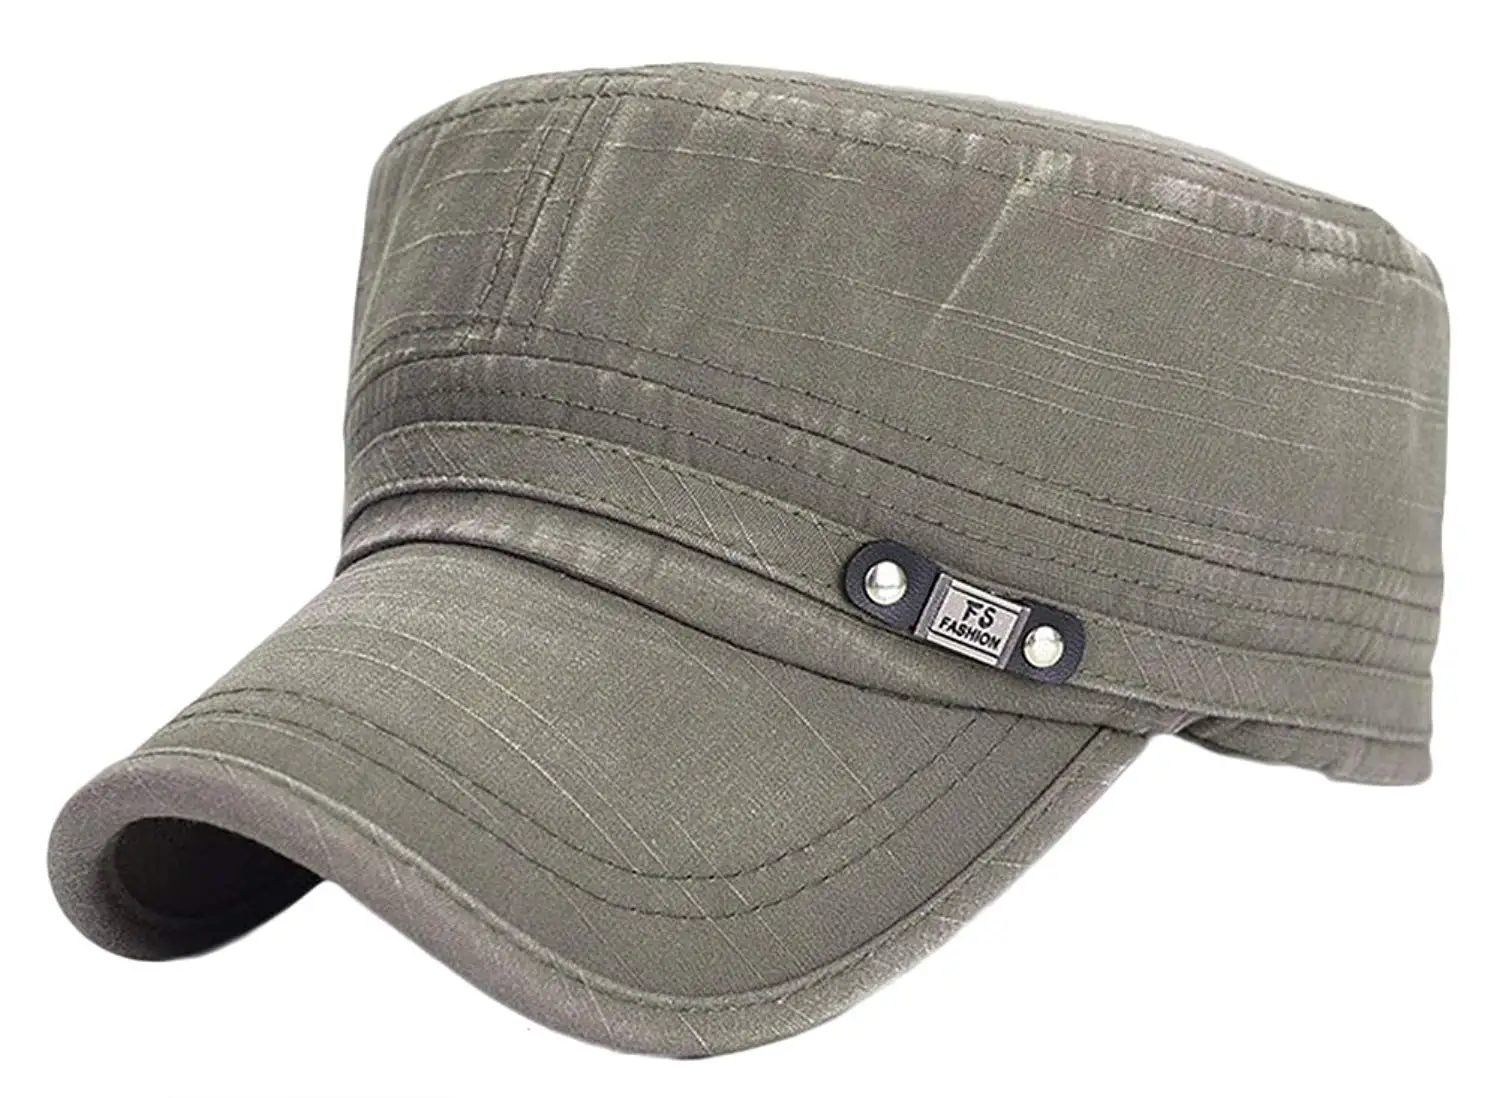 Cotton Twill Army cap. Cadet-Style. A French Military cap with a Flat Top and horizontal Brim.. Купить кепки на авито